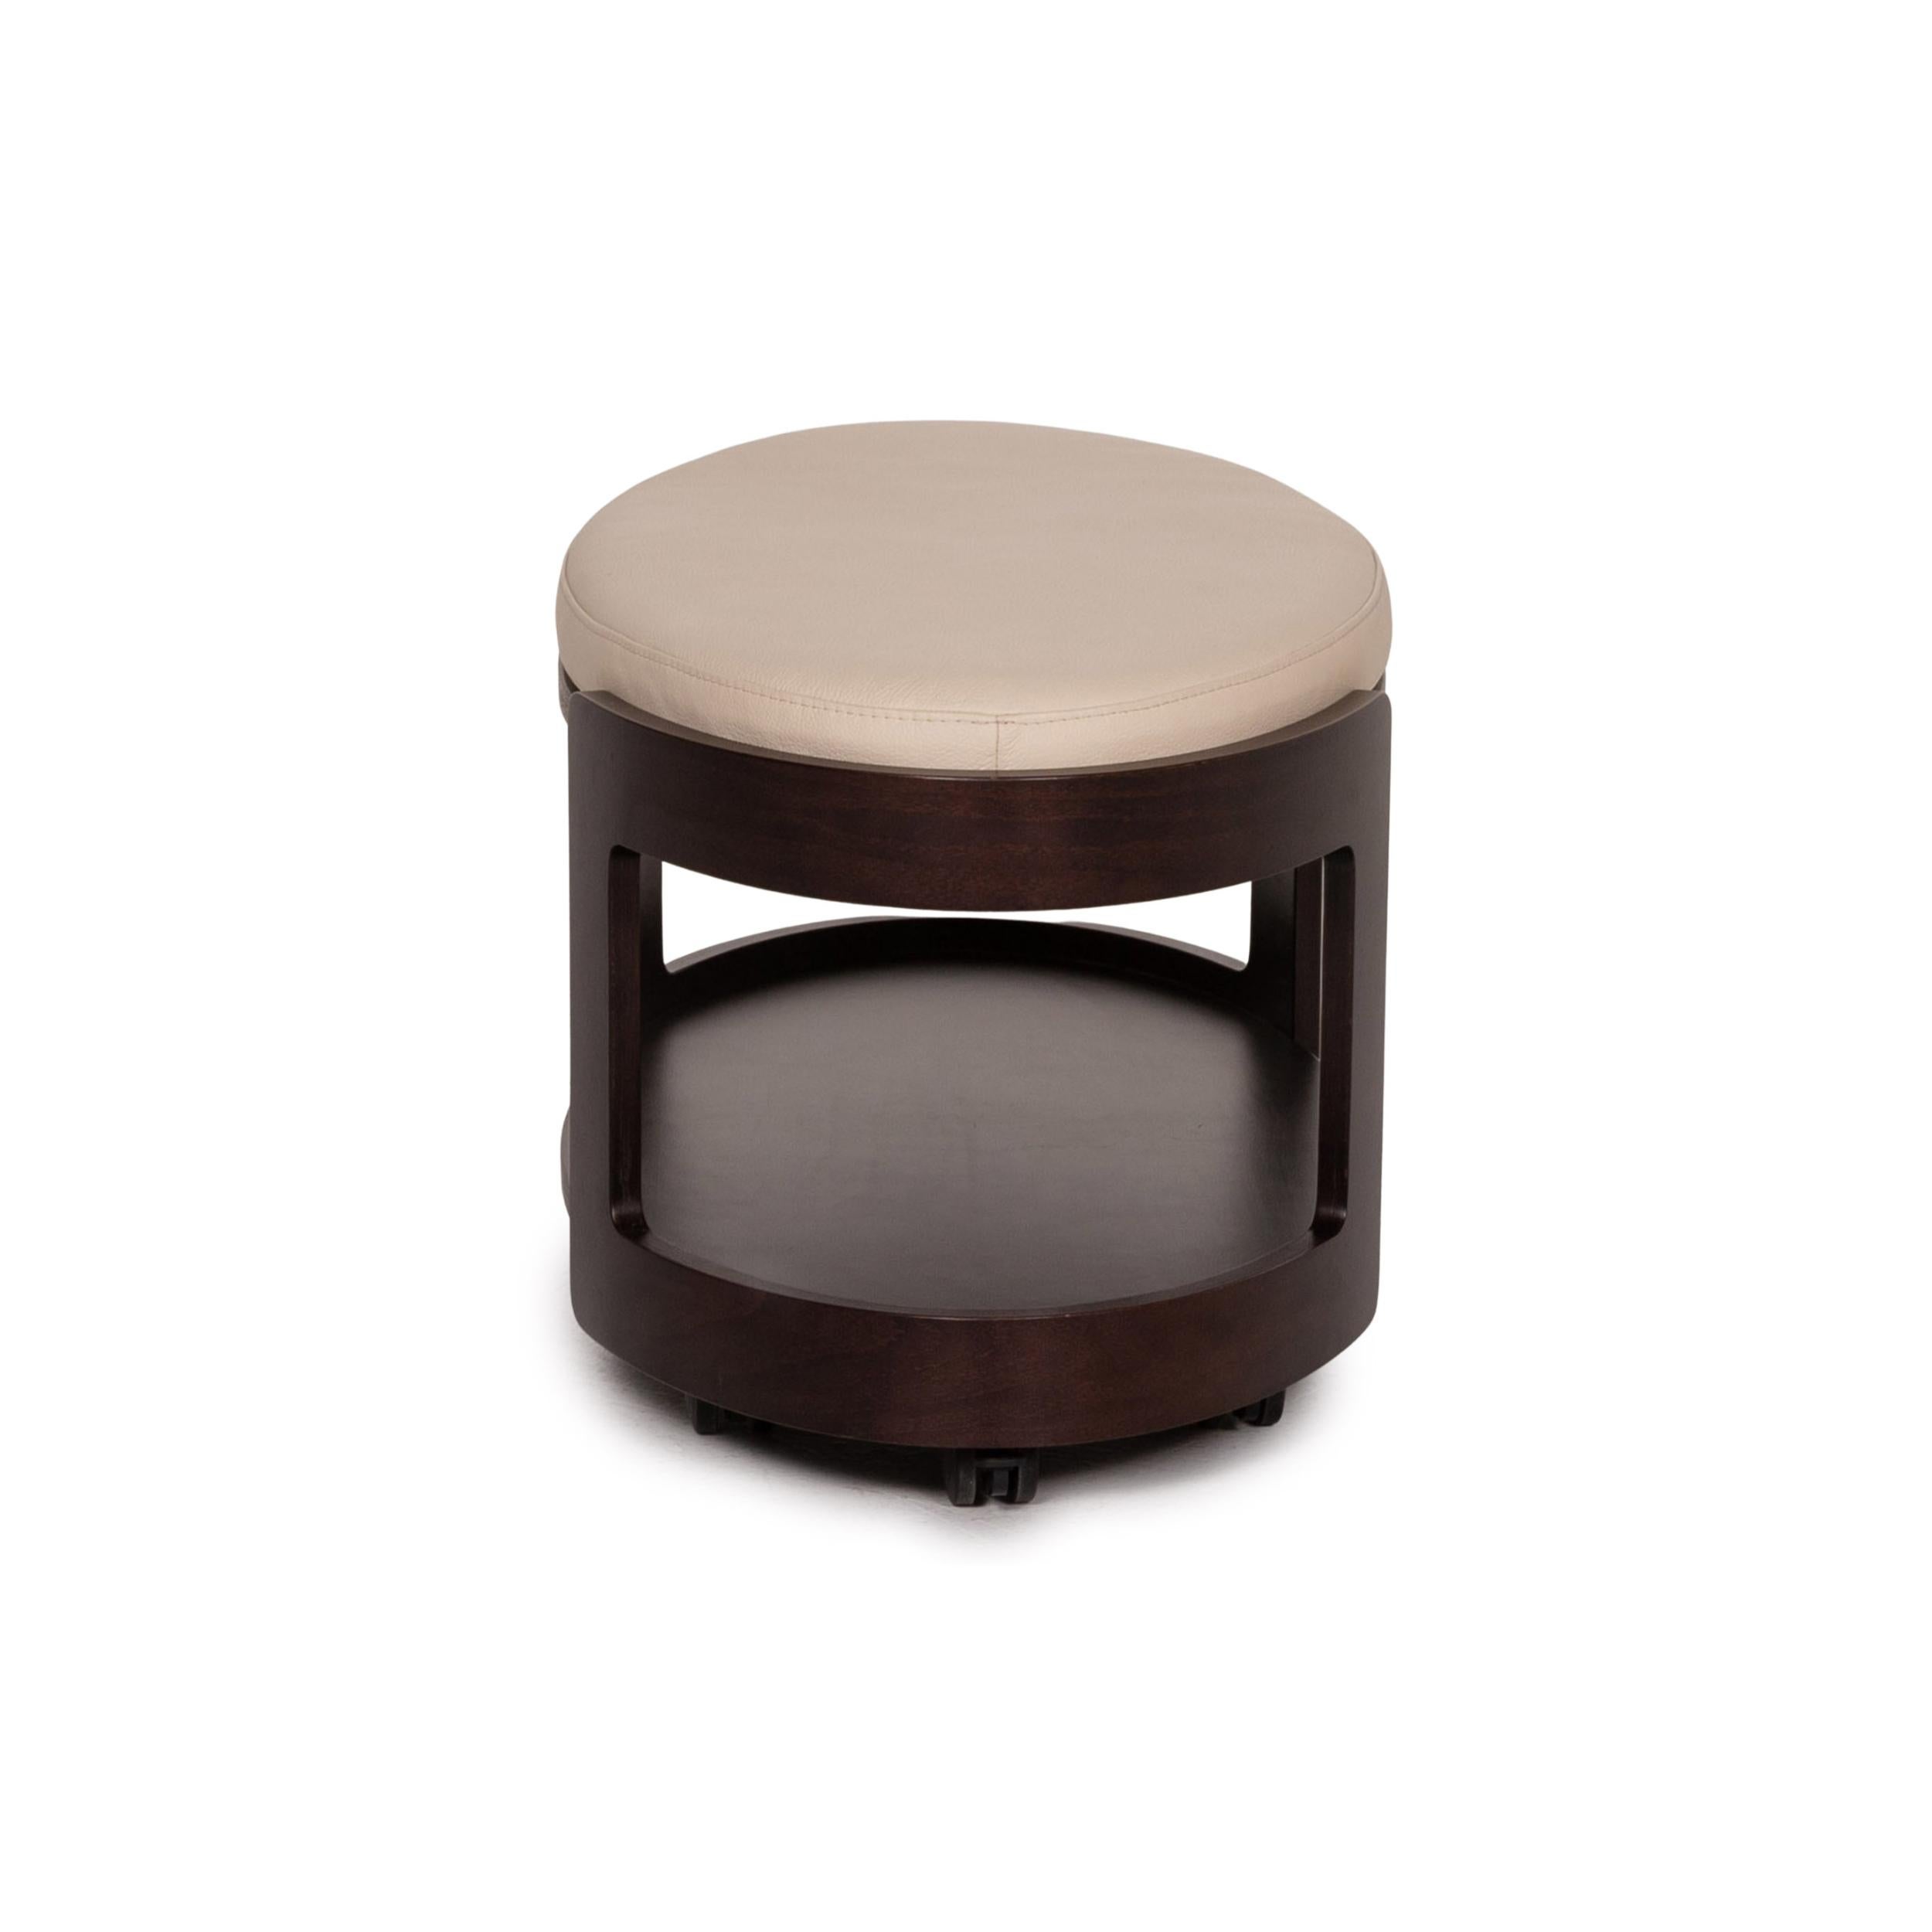 Contemporary Stressless Leather Wood Coffee Table Dark Brown Cream Table Stool